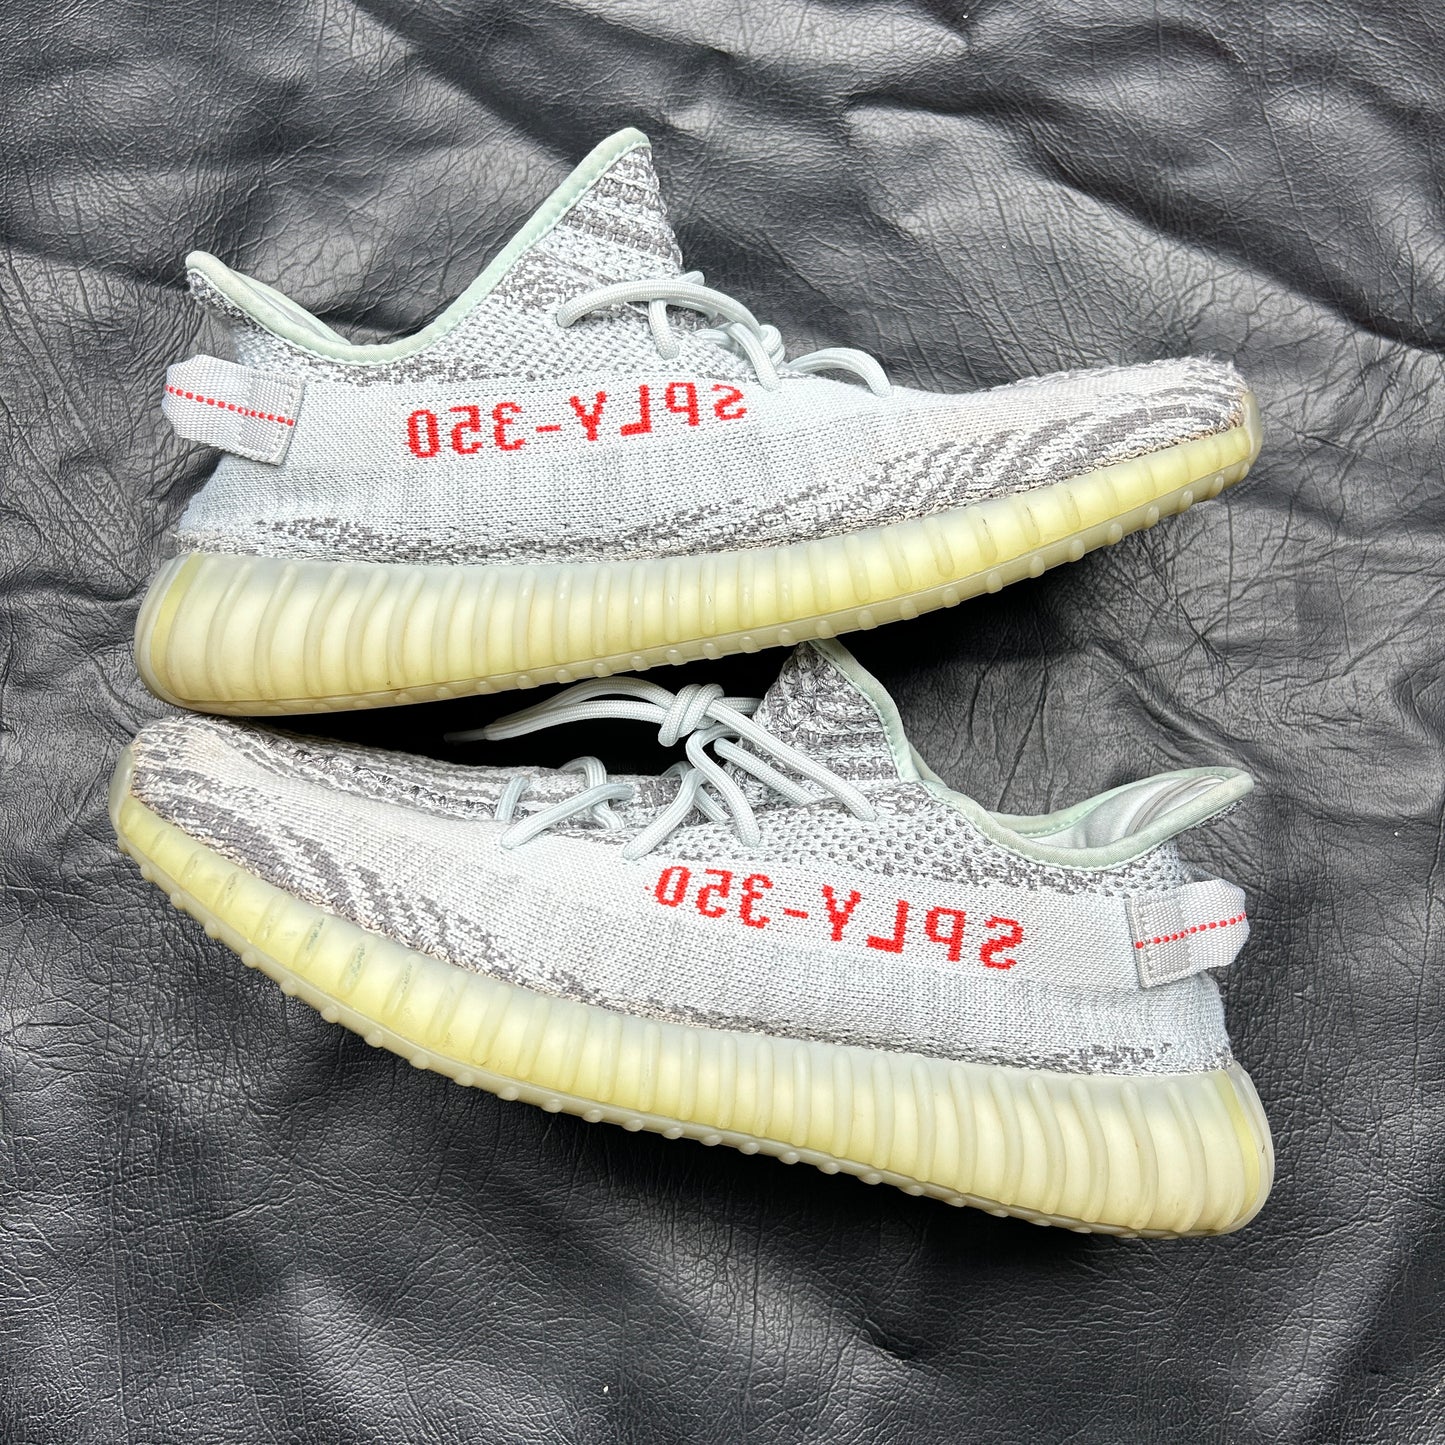 Yeezy Boost 350 V2 Blue Tint (Pre-Owned)